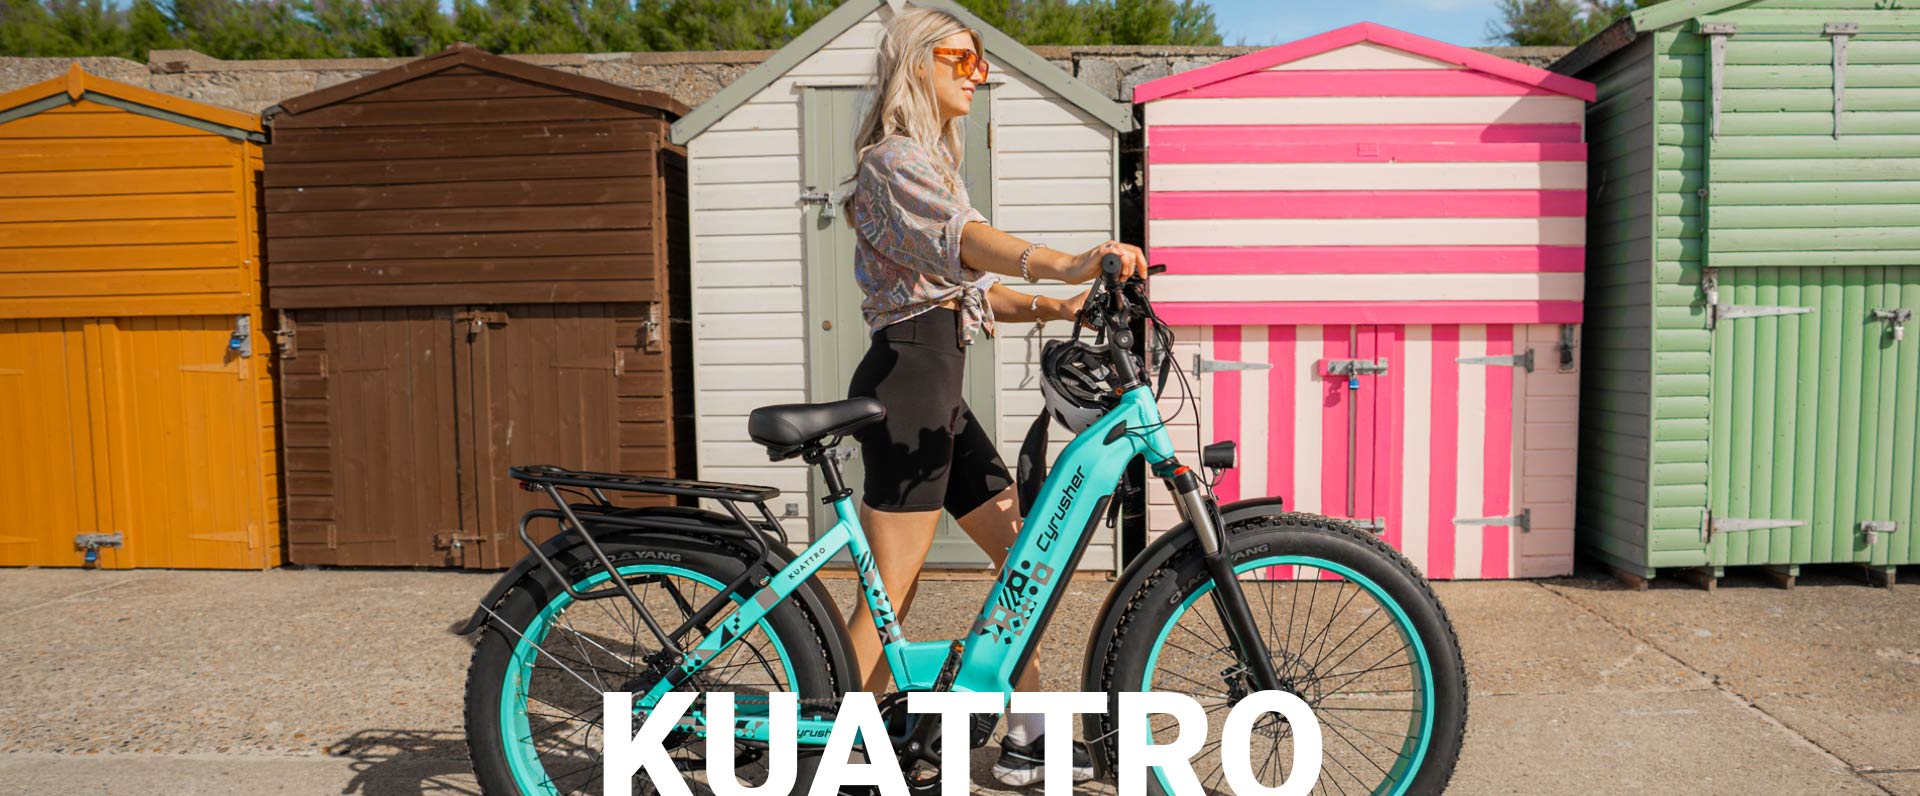 Kuattrocouverture